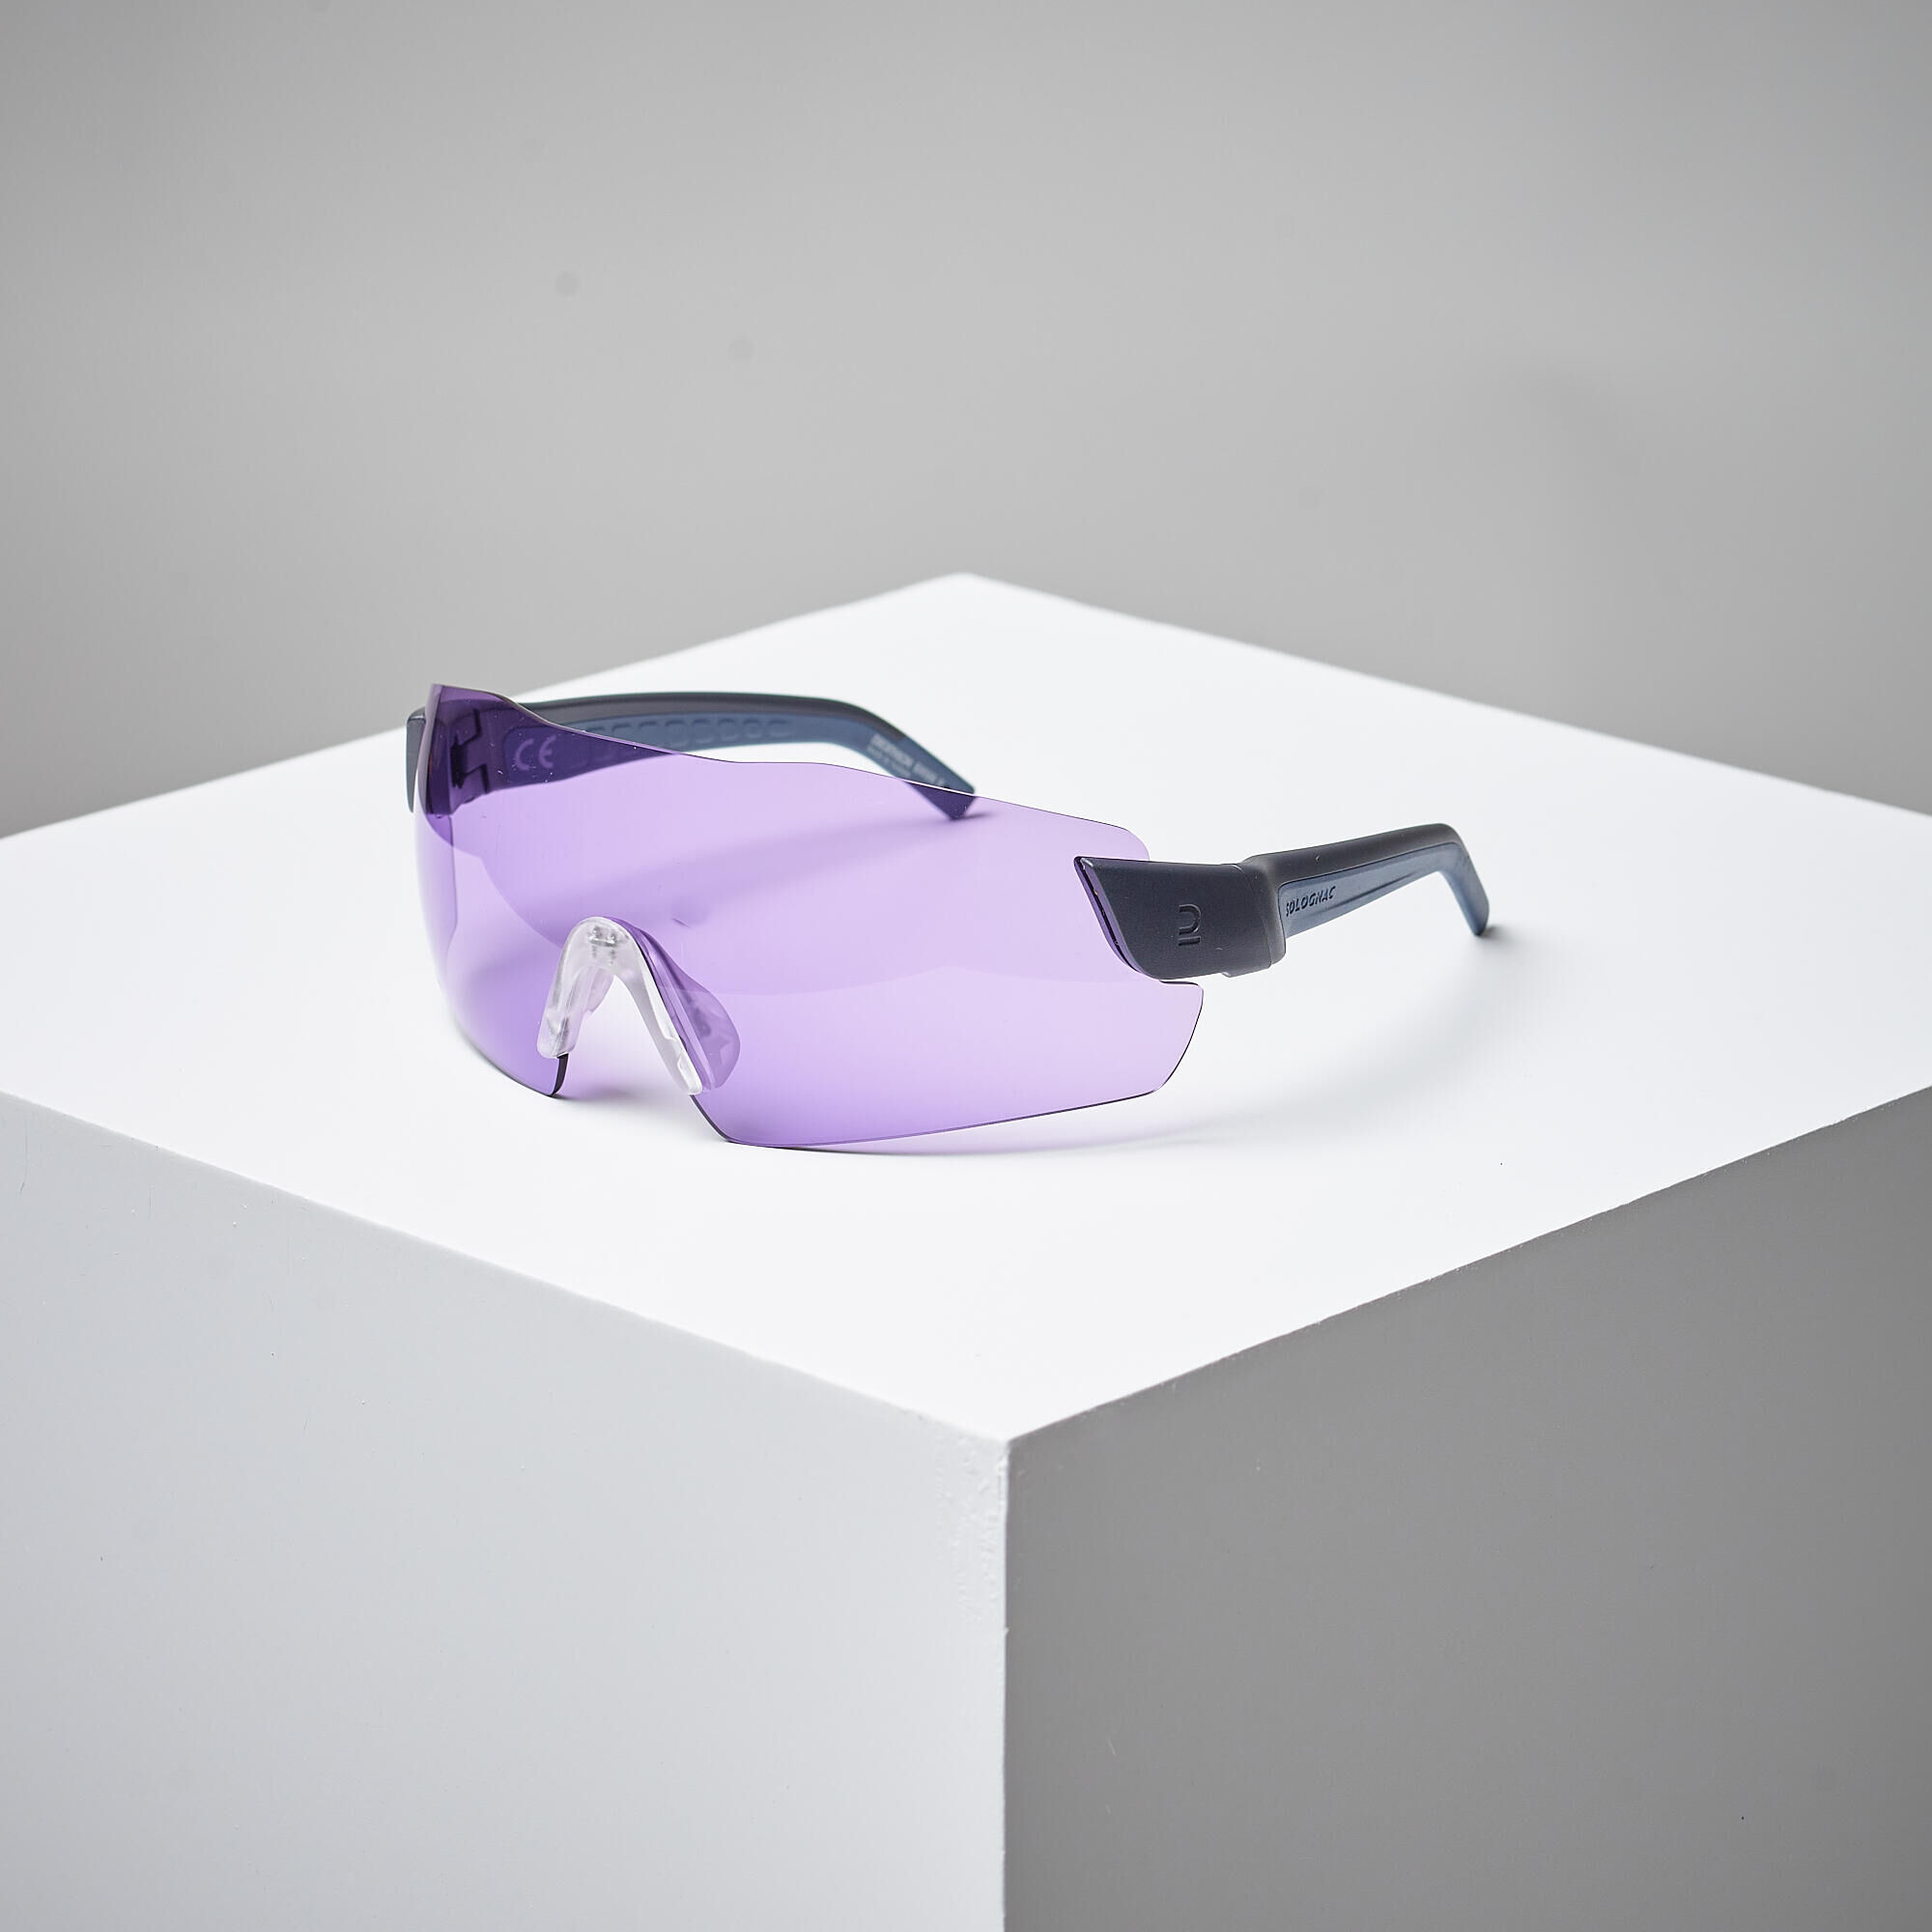 SOLOGNAC SAFETY GLASSES FOR CLAY PIGEON SHOOTING 500 PURPLE CATEGORY 2